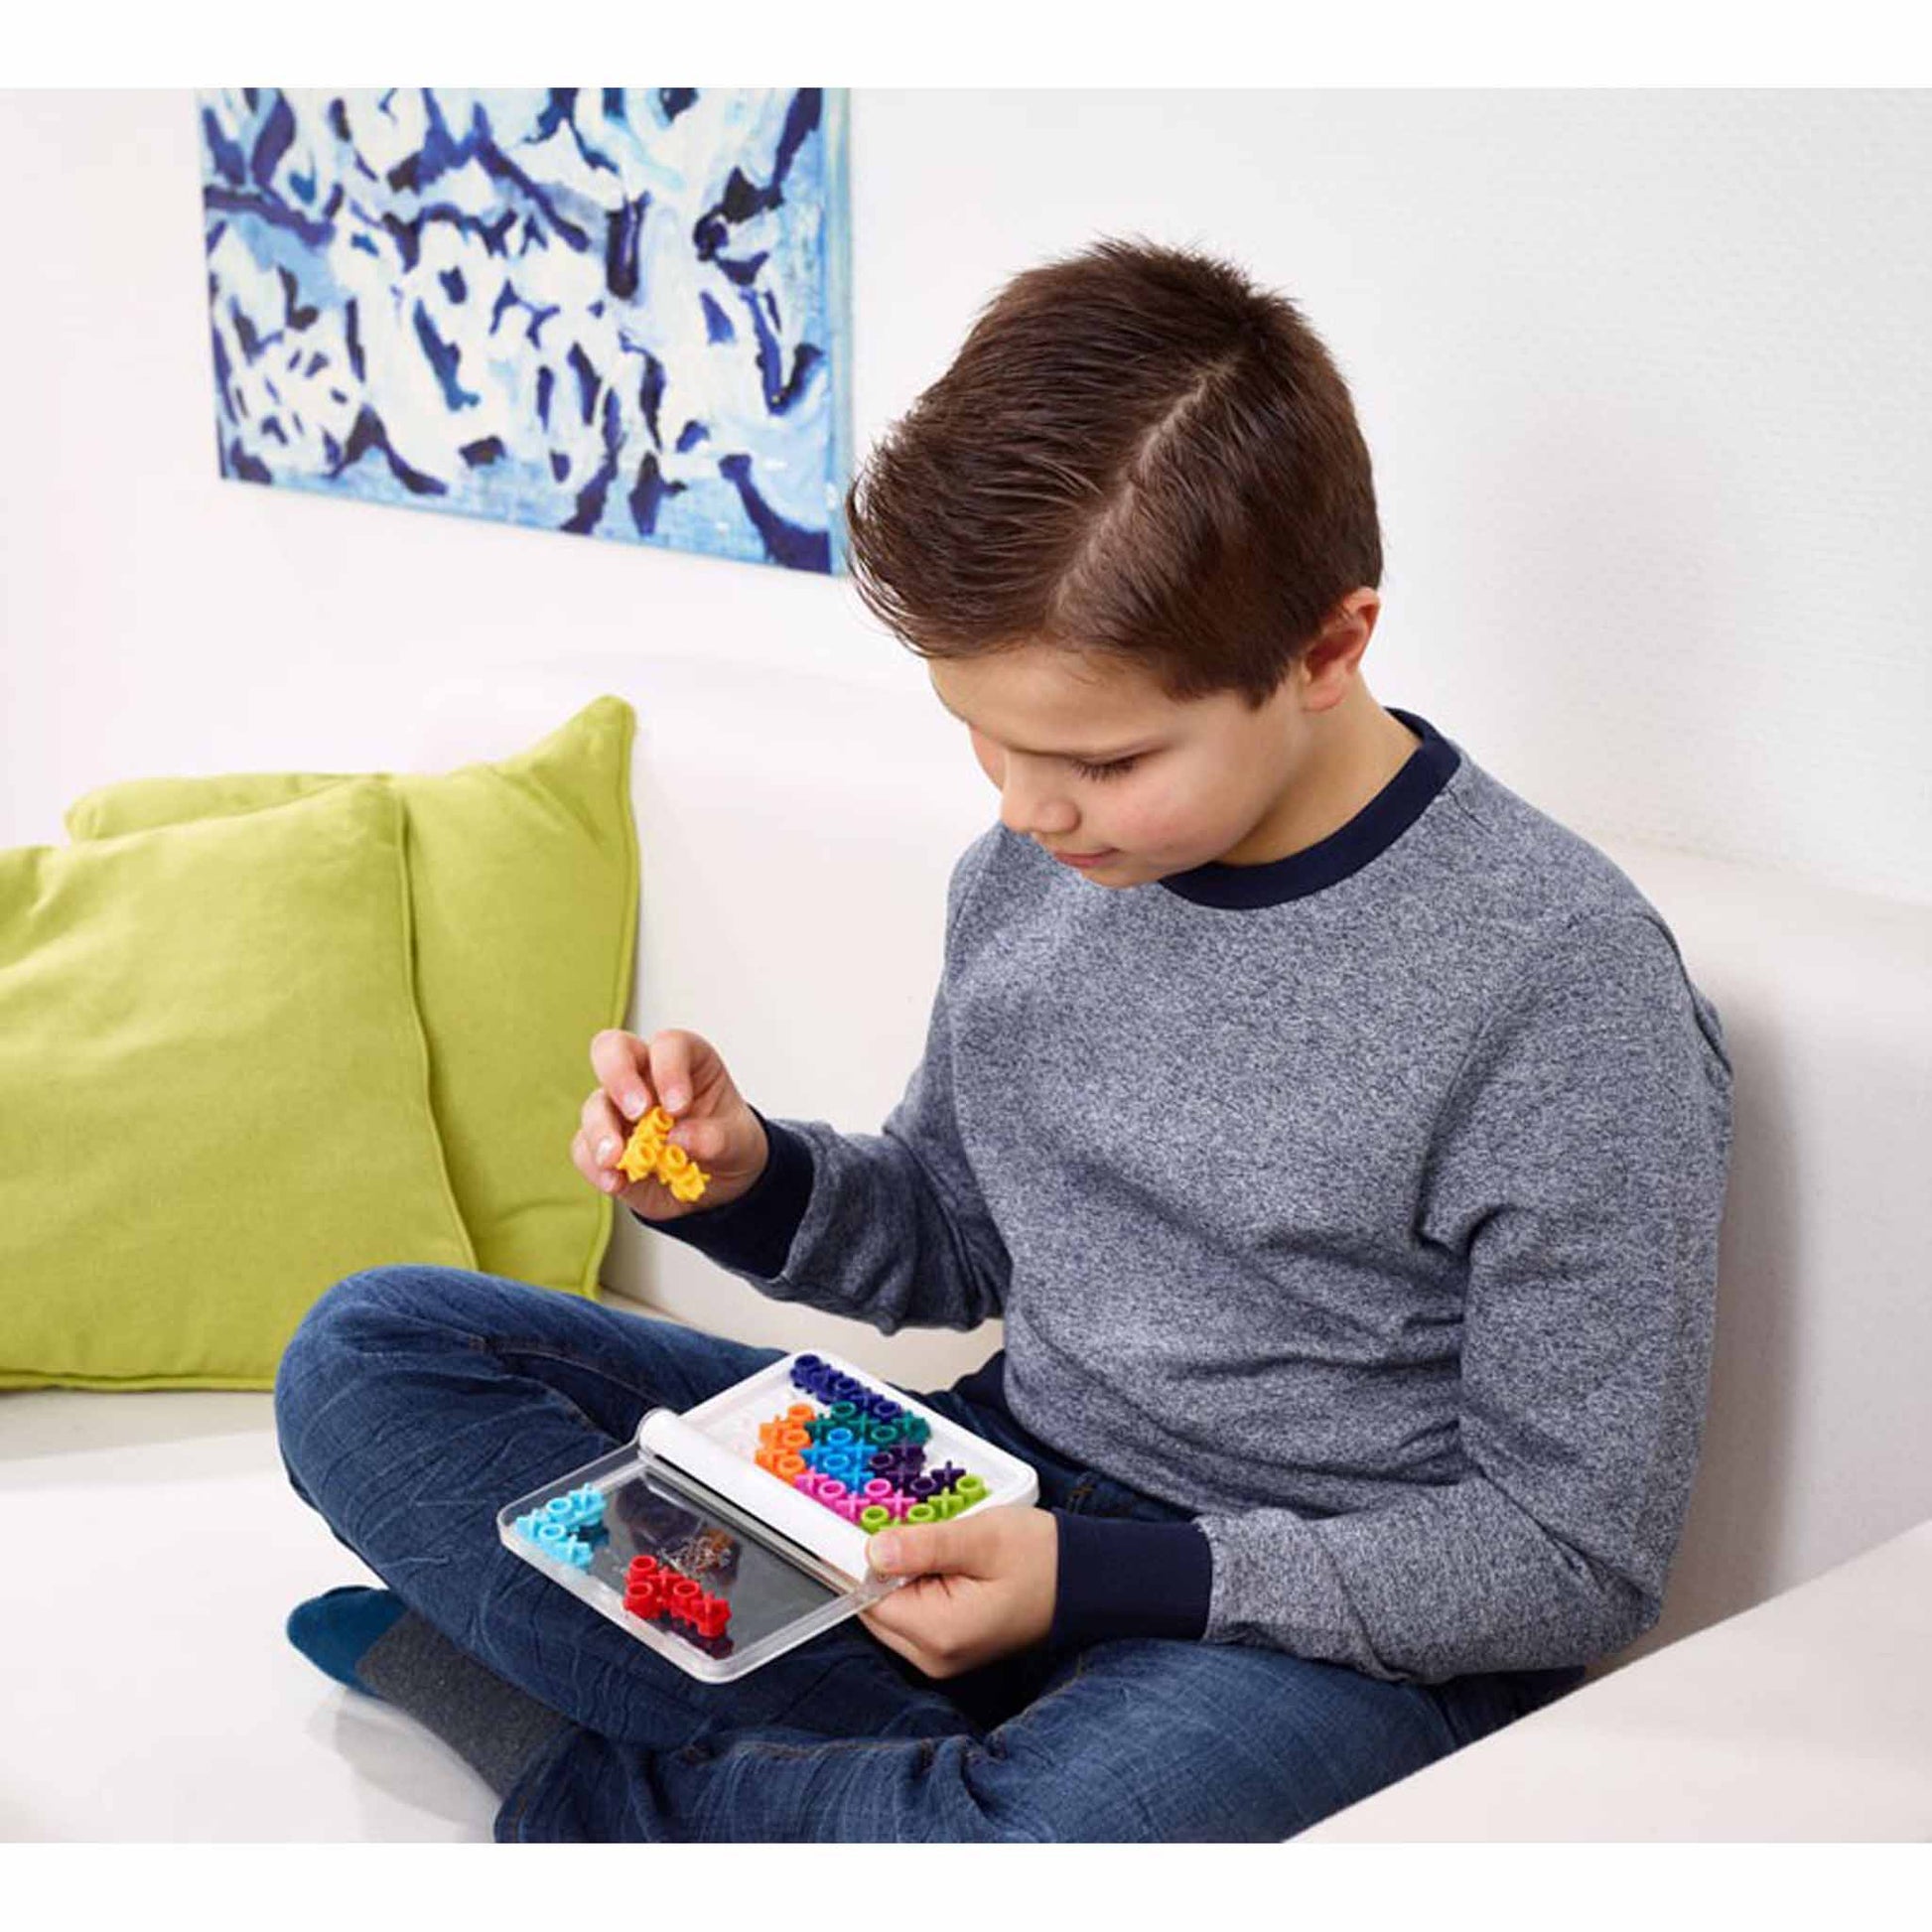 Photo of a boy sitting cross-legged on a couch playing IQ XOXO mind puzzle by Smart Games.